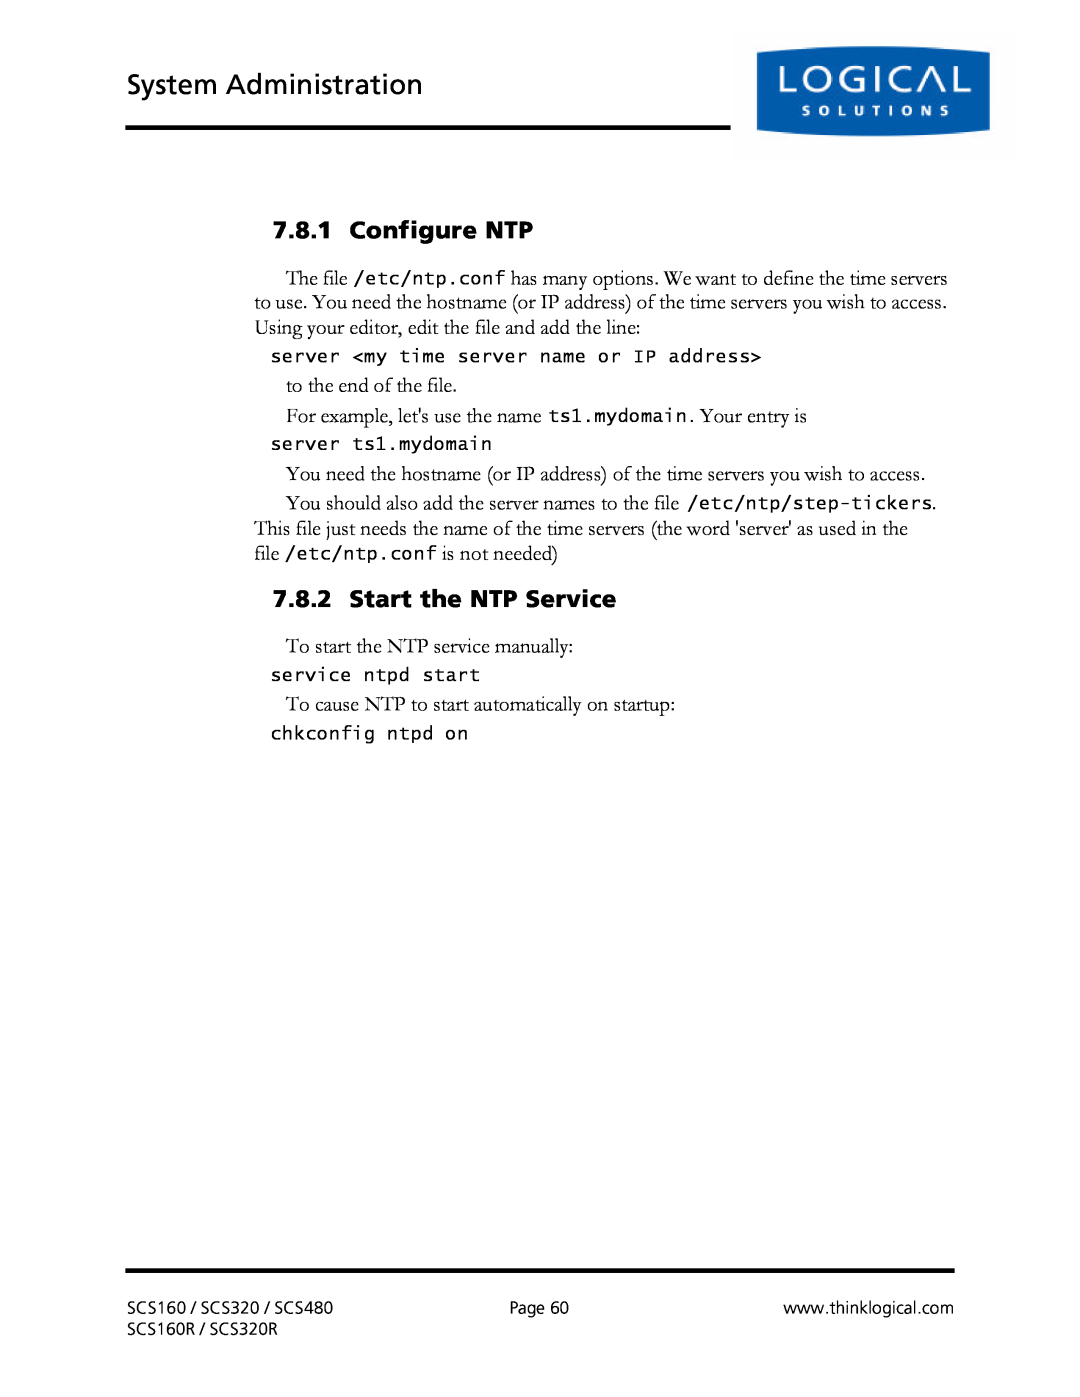 Logical Solutions SCS-R manual Configure NTP, Start the NTP Service, System Administration 